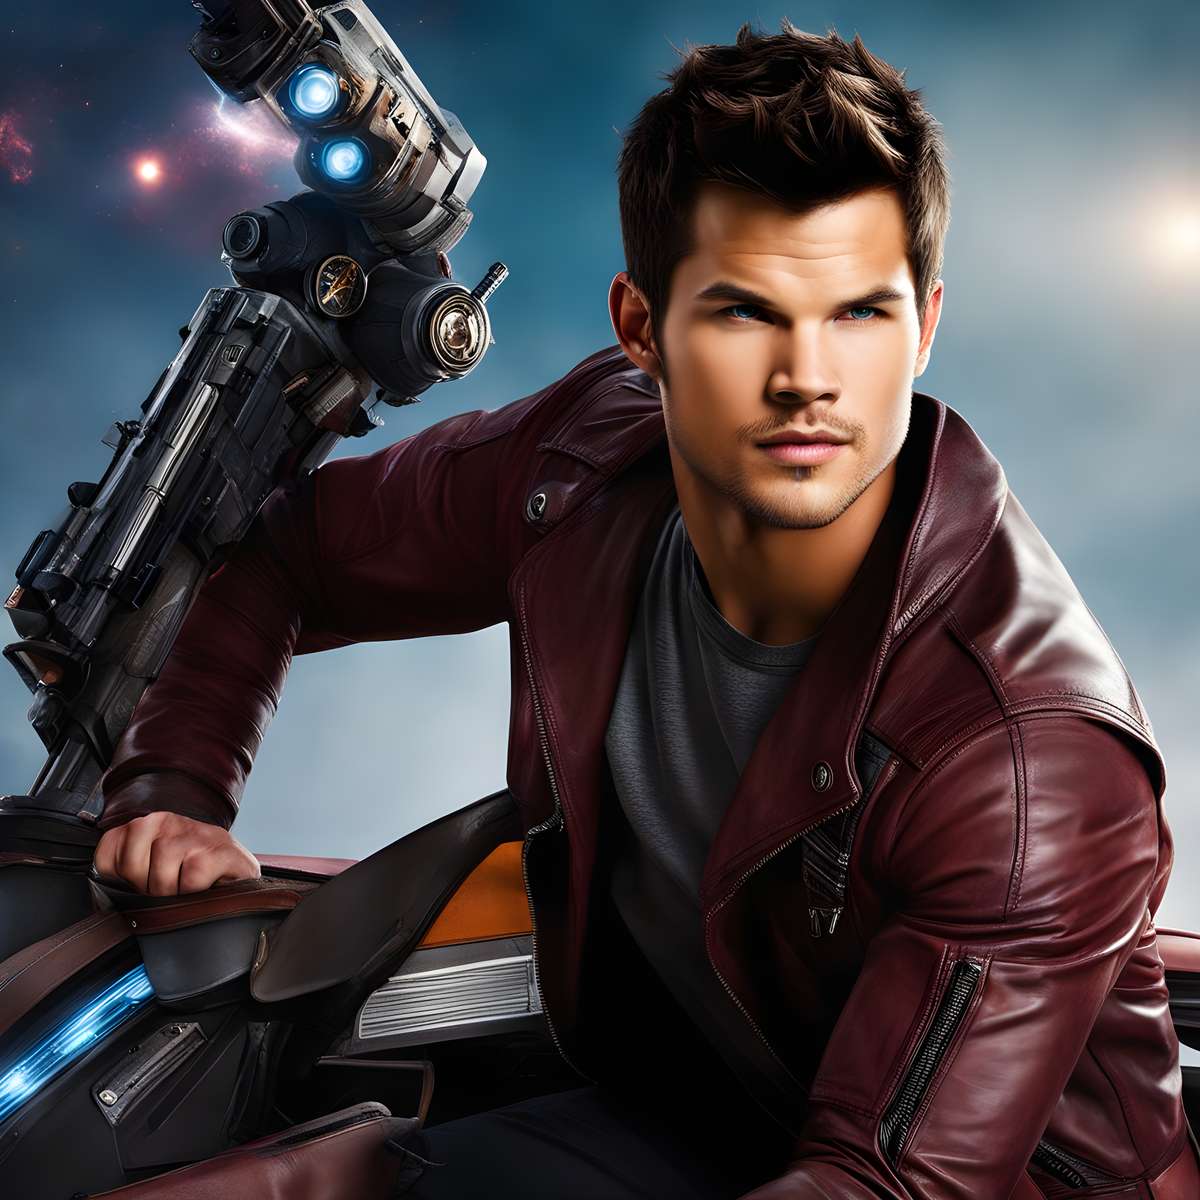 Taylor Lautner as Star Lord online puzzle